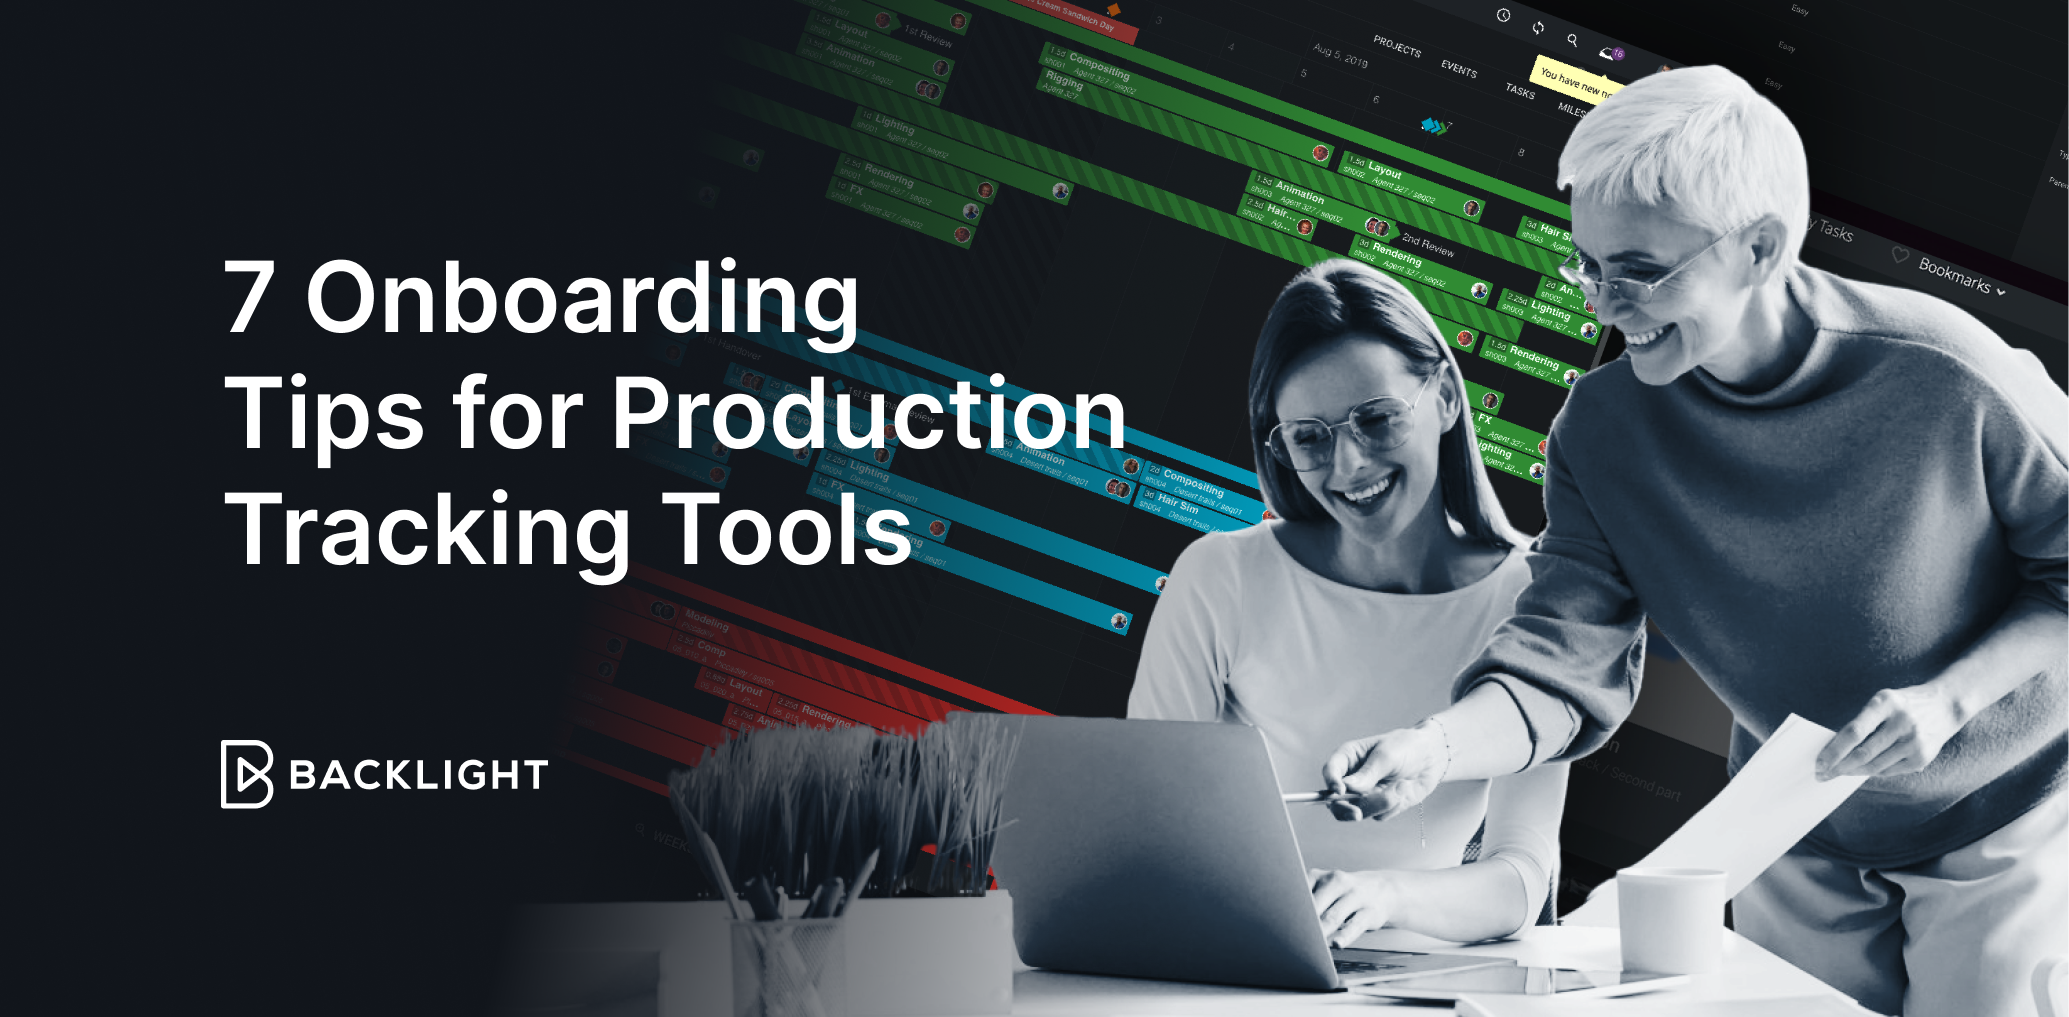 7 Onboarding Tips for Production Tracking Tools